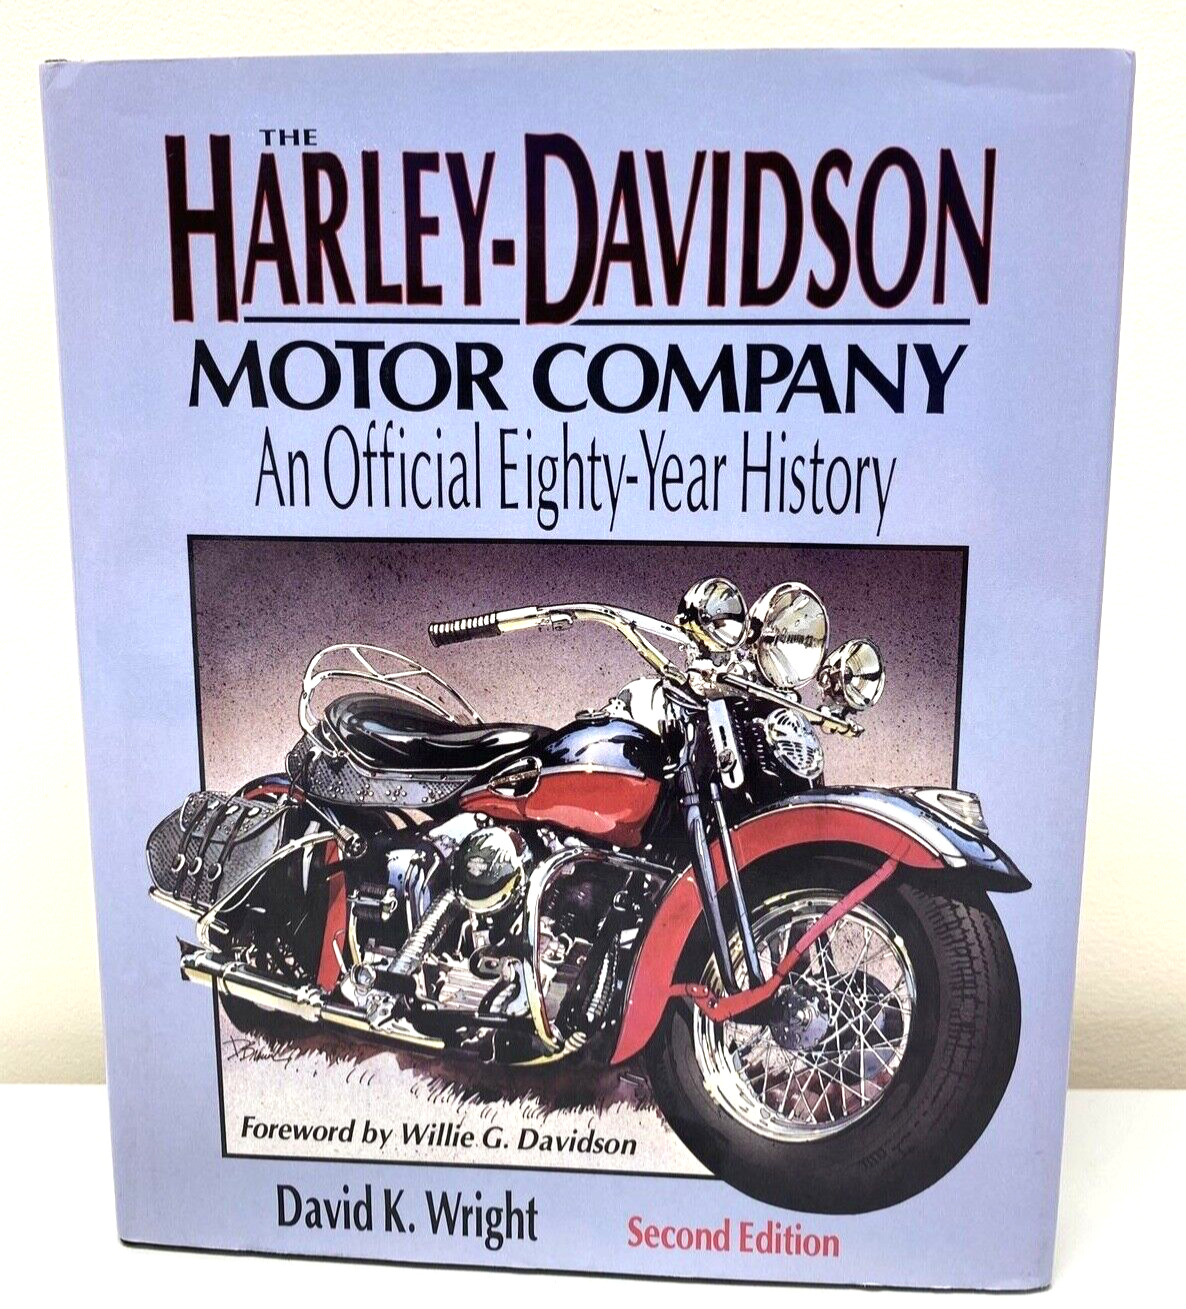 The Harley-Davidson Motor Company An Official Eighty-Year History 2nd Edition 